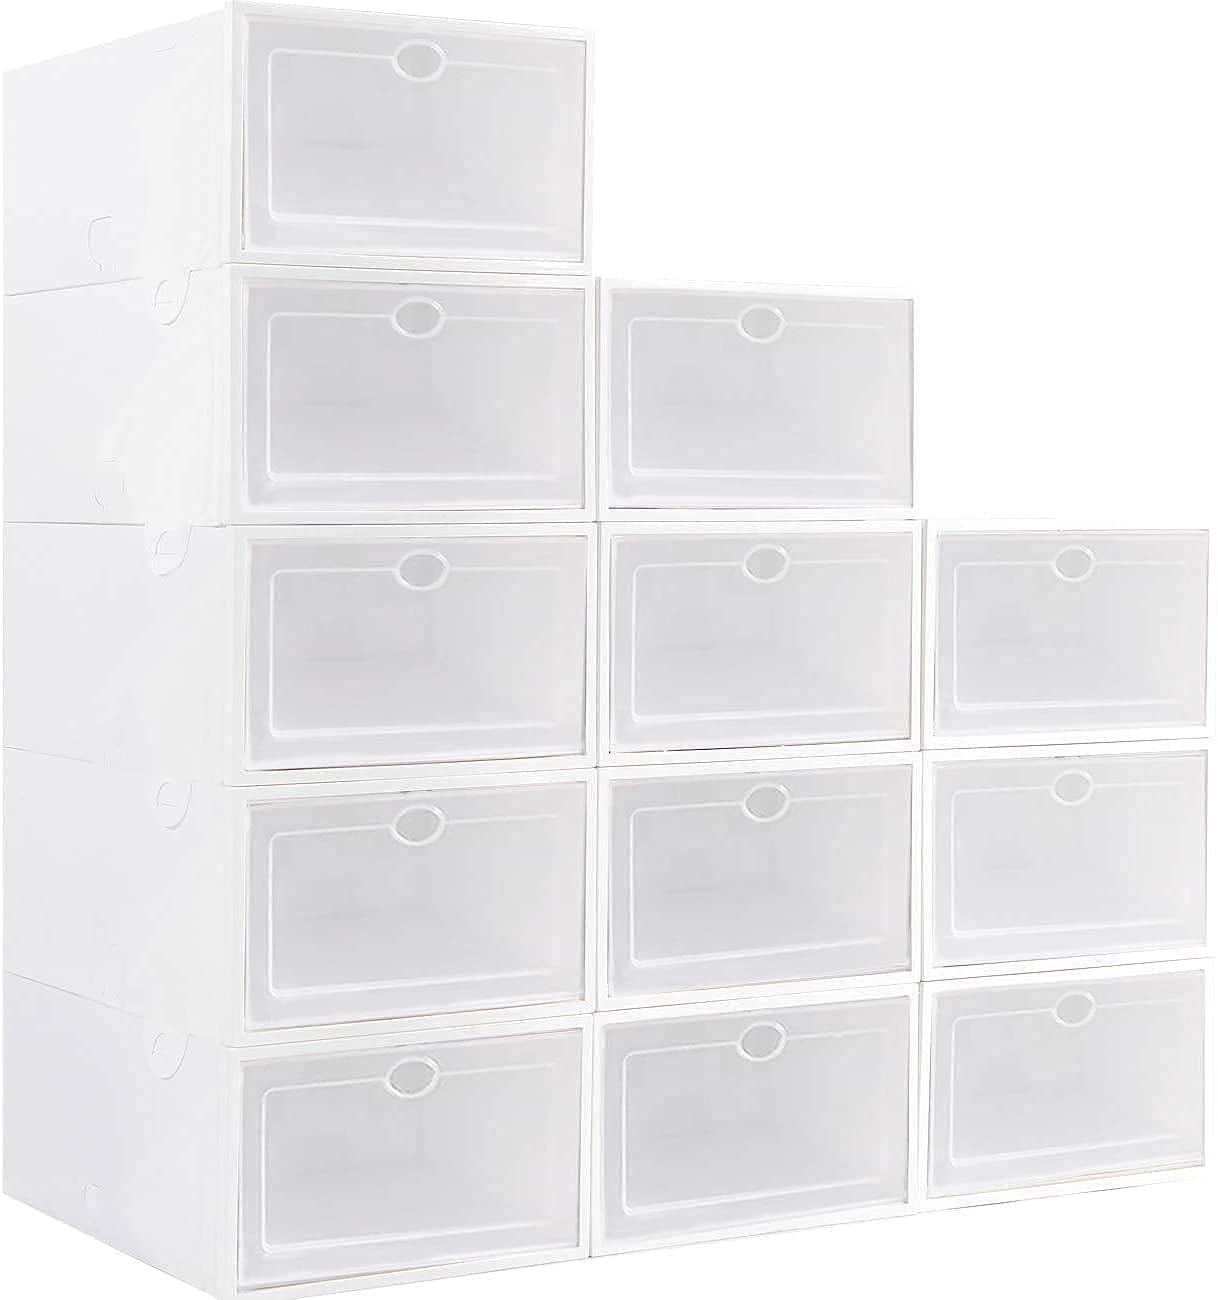 EOENVIVS Plastic Storage Bins 12 Pack Plastic Storage Container with Snap  Lids, Stackable Shoe Organizer Boxes Storage Baskets for Organizing Closet